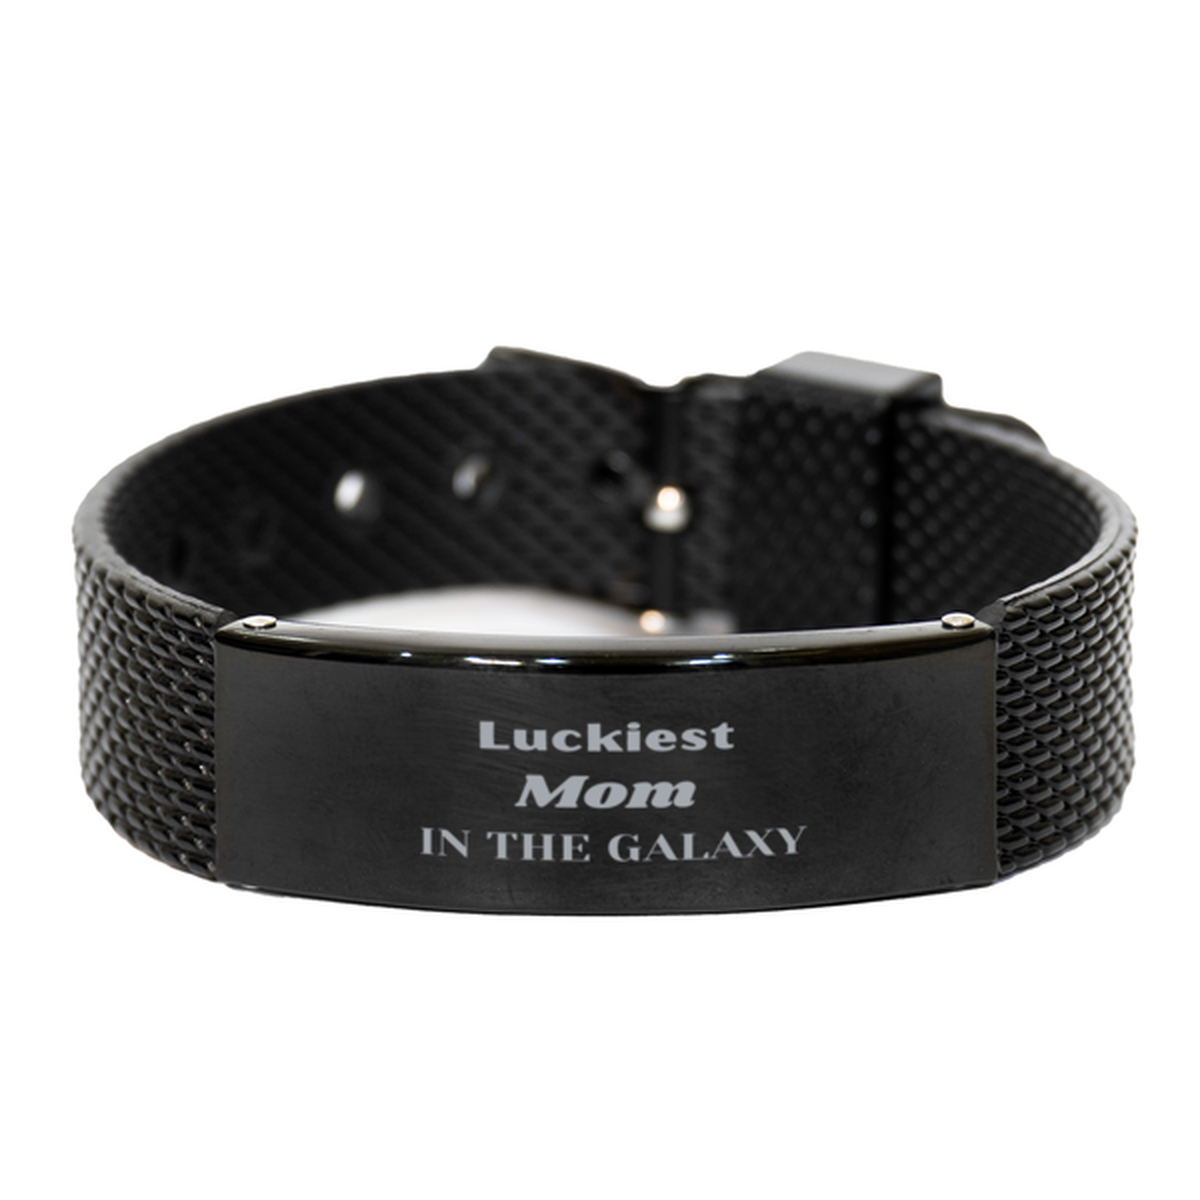 Luckiest Mom in the Galaxy, To My Mom Engraved Gifts, Christmas Mom Black Shark Mesh Bracelet Gifts, X-mas Birthday Unique Gifts For Mom Men Women